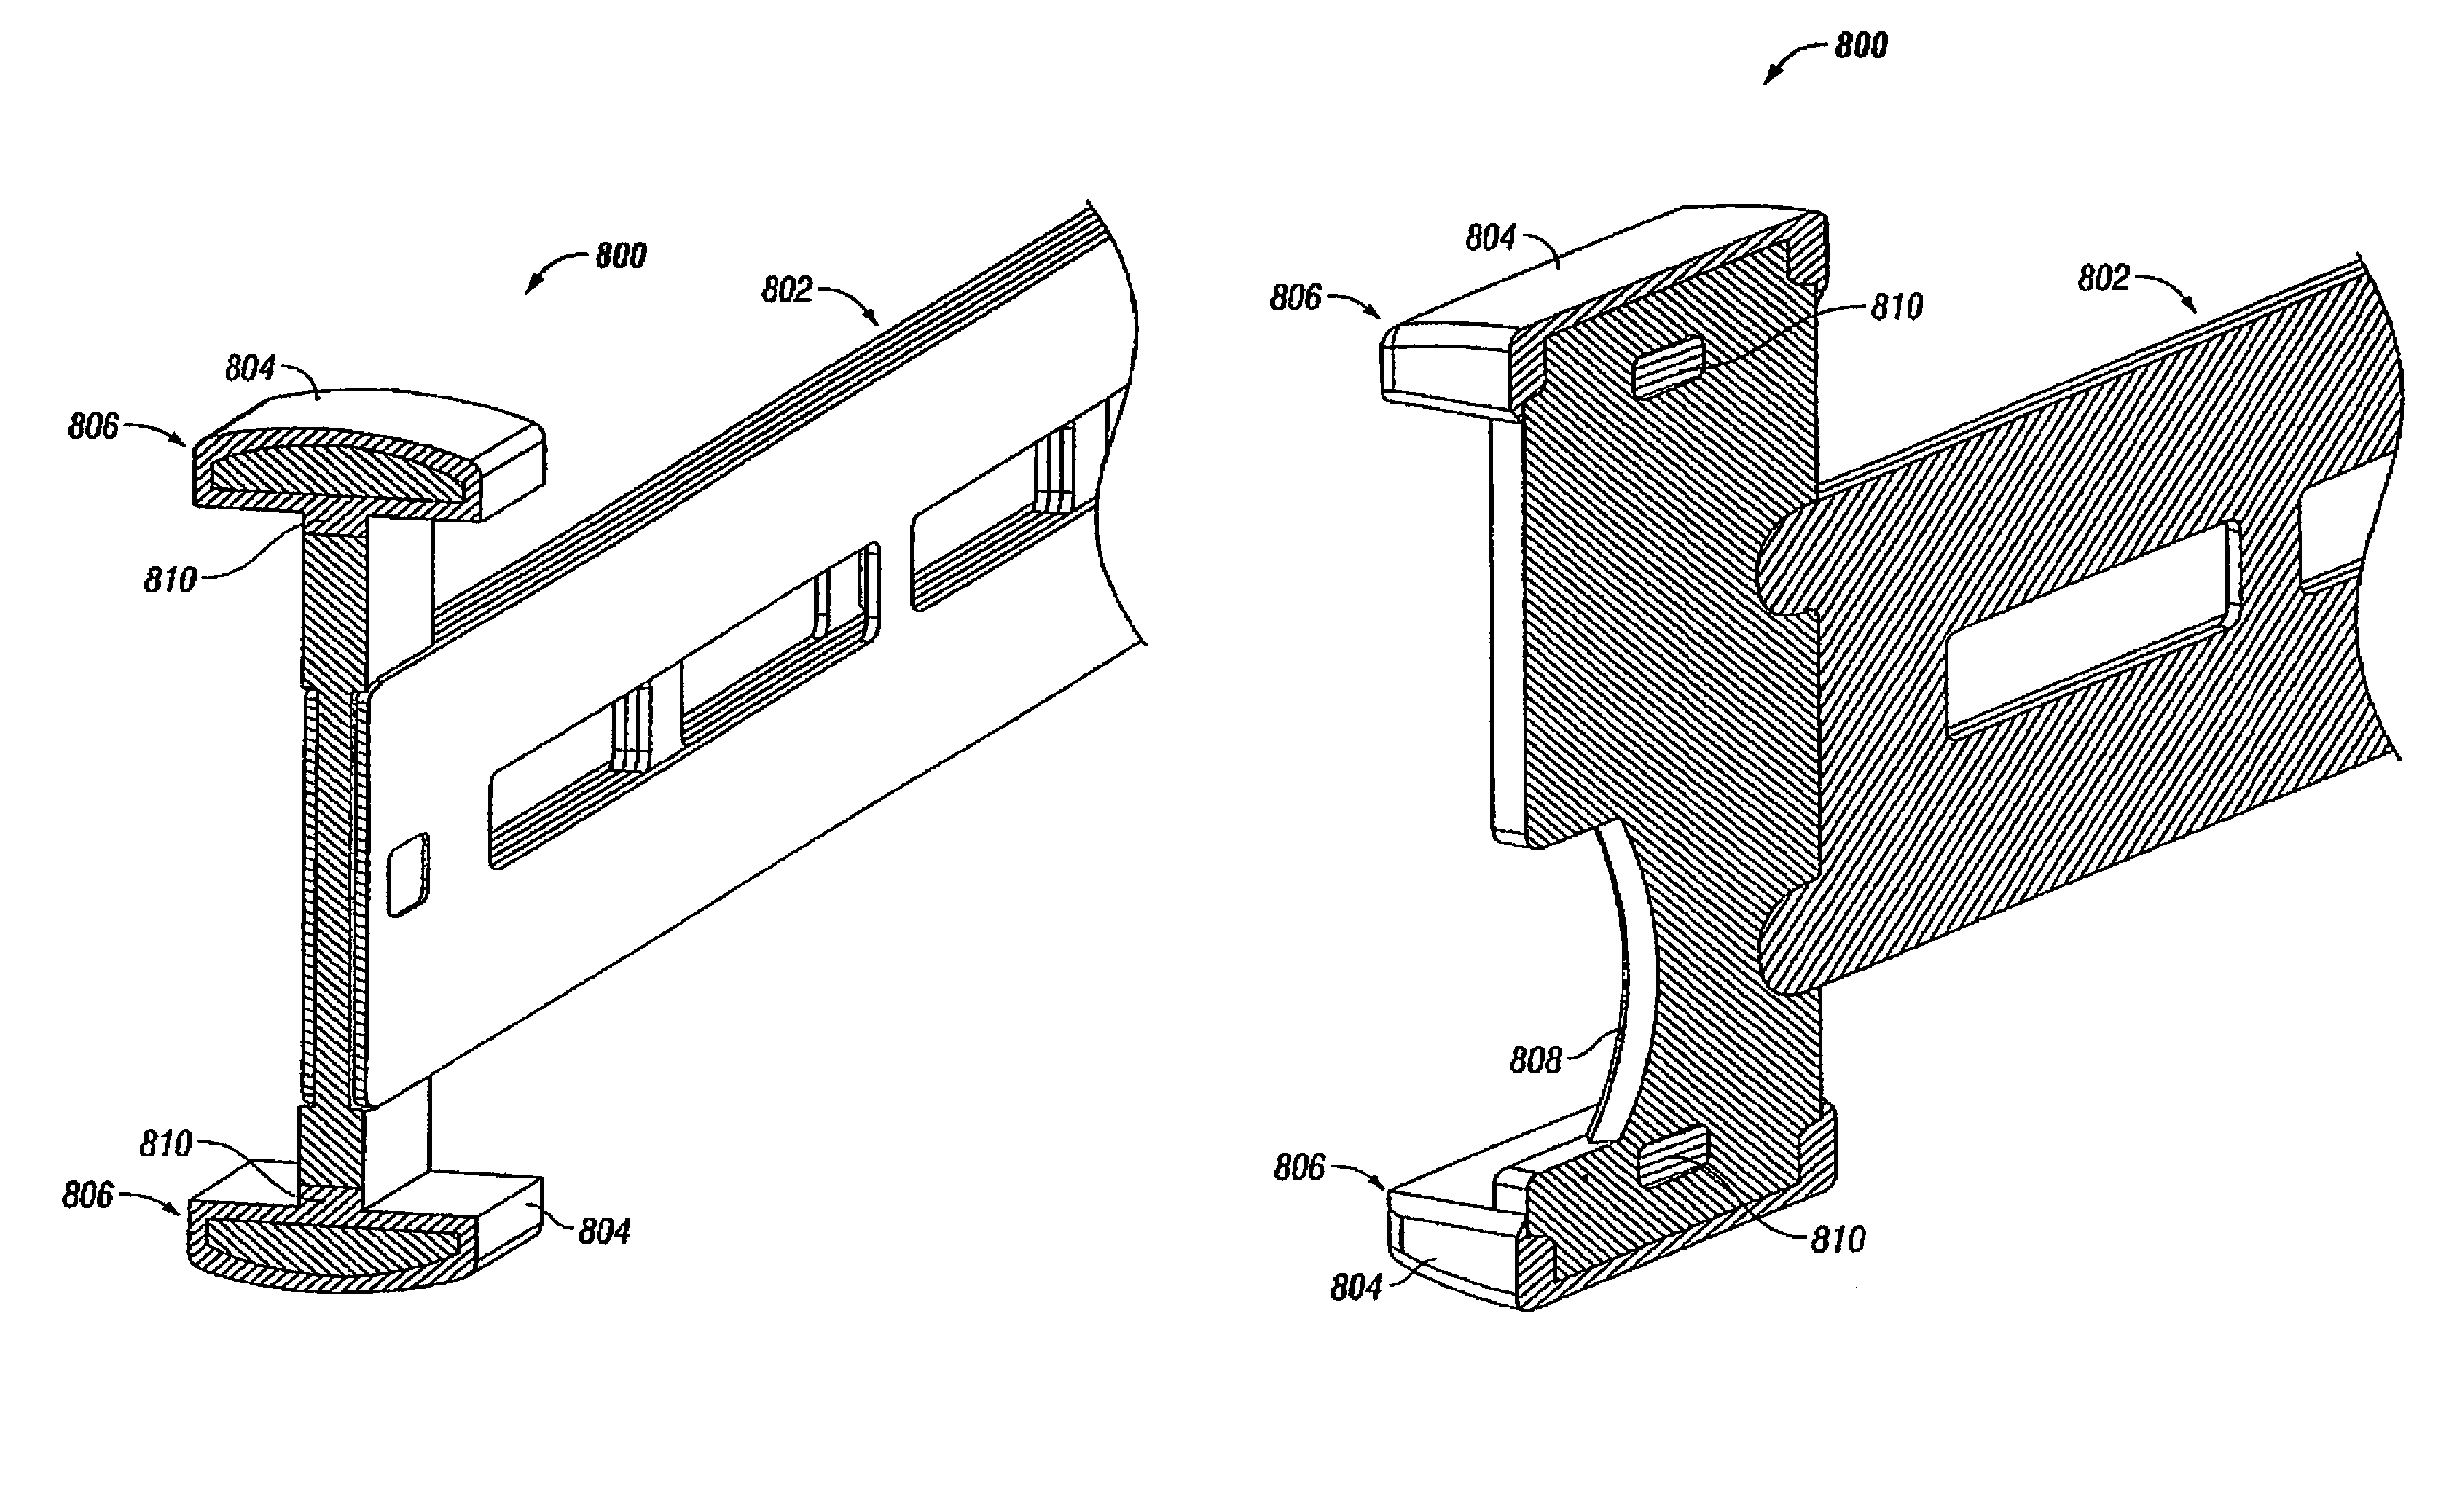 Surgical instrument having a plastic surface